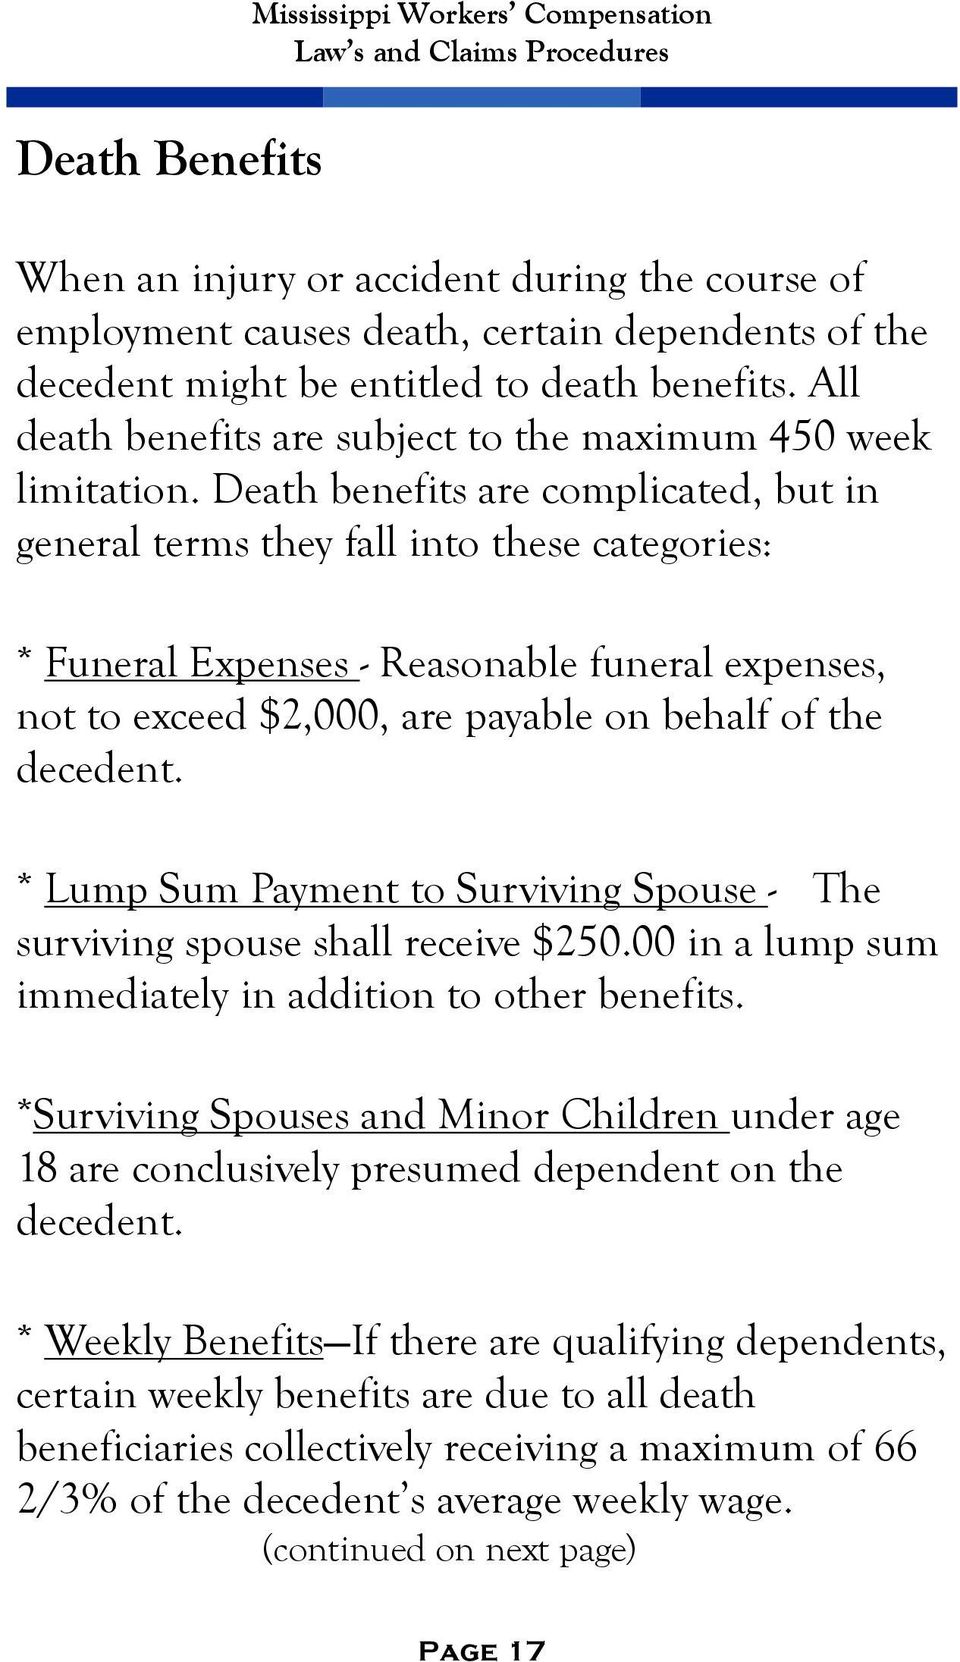 Death benefits are complicated, but in general terms they fall into these categories: * Funeral Expenses - Reasonable funeral expenses, not to exceed $2,000, are payable on behalf of the decedent.